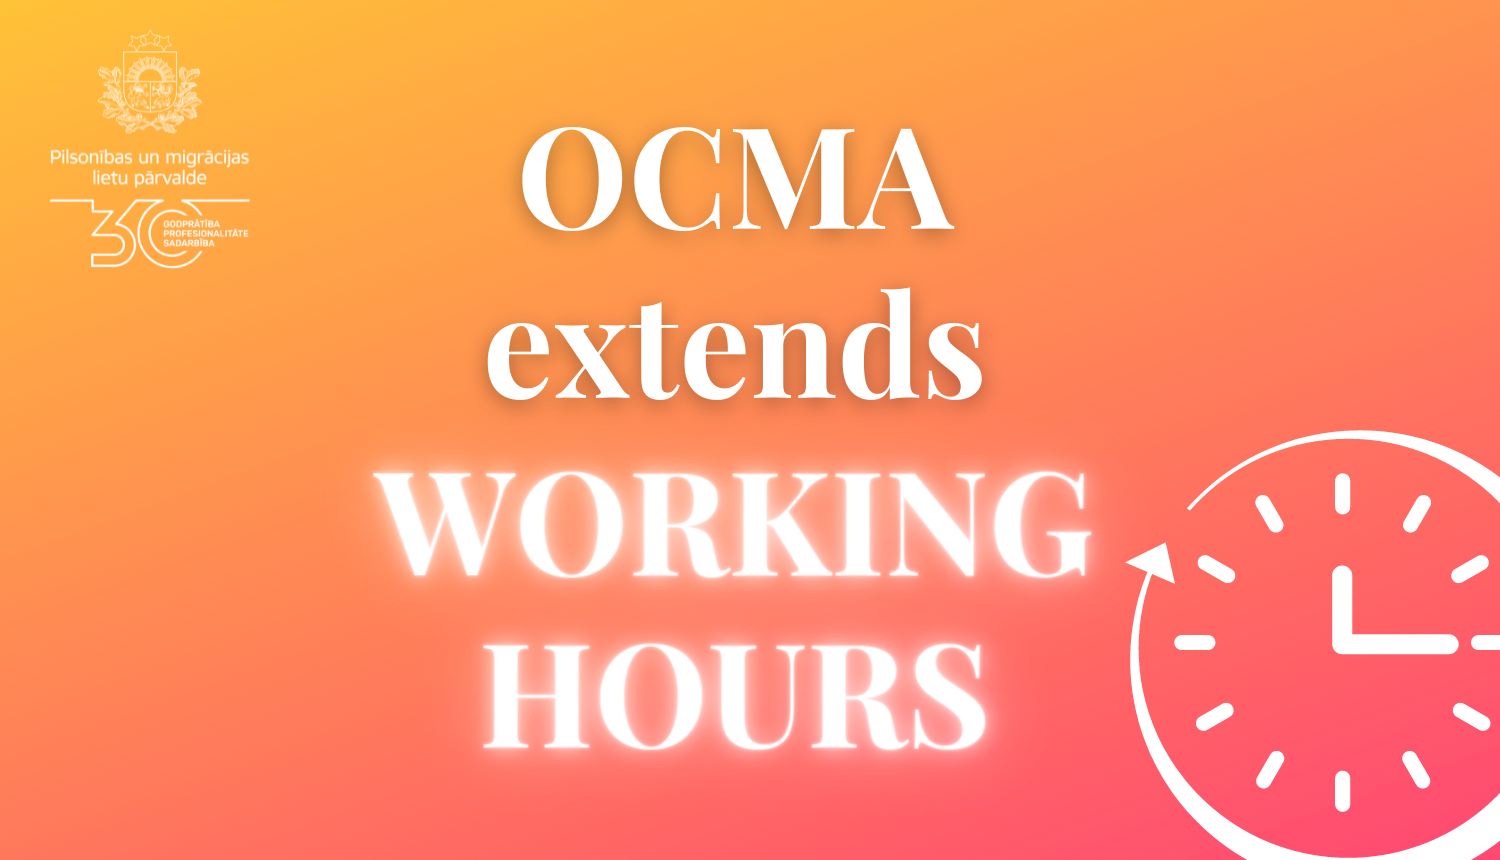 OCMA extends working hours bright visual in orange colour